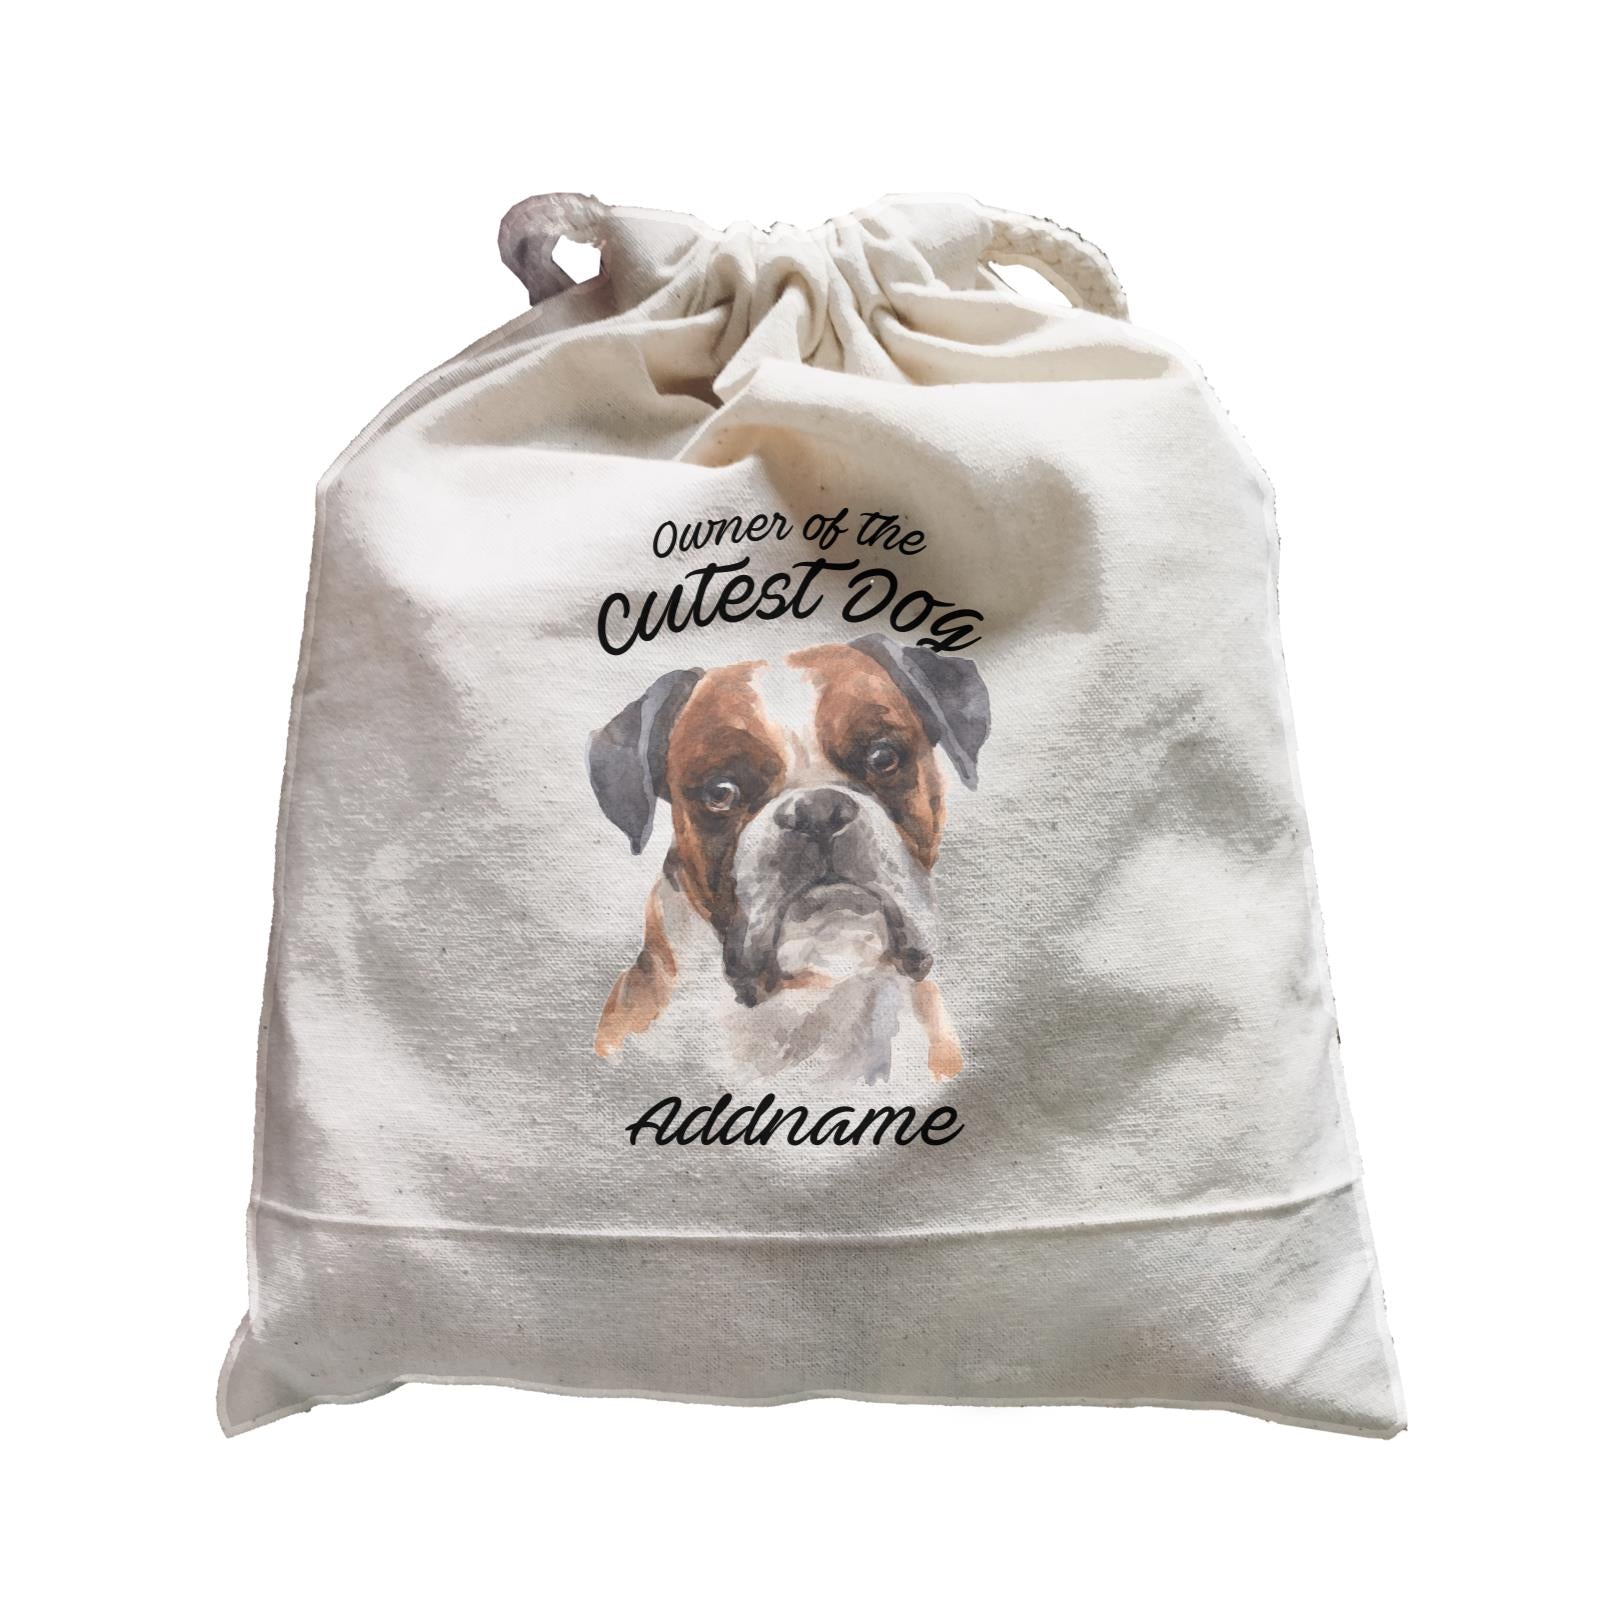 Watercolor Dog Owner Of The Cutest Dog Boxer Black Ears Addname Satchel